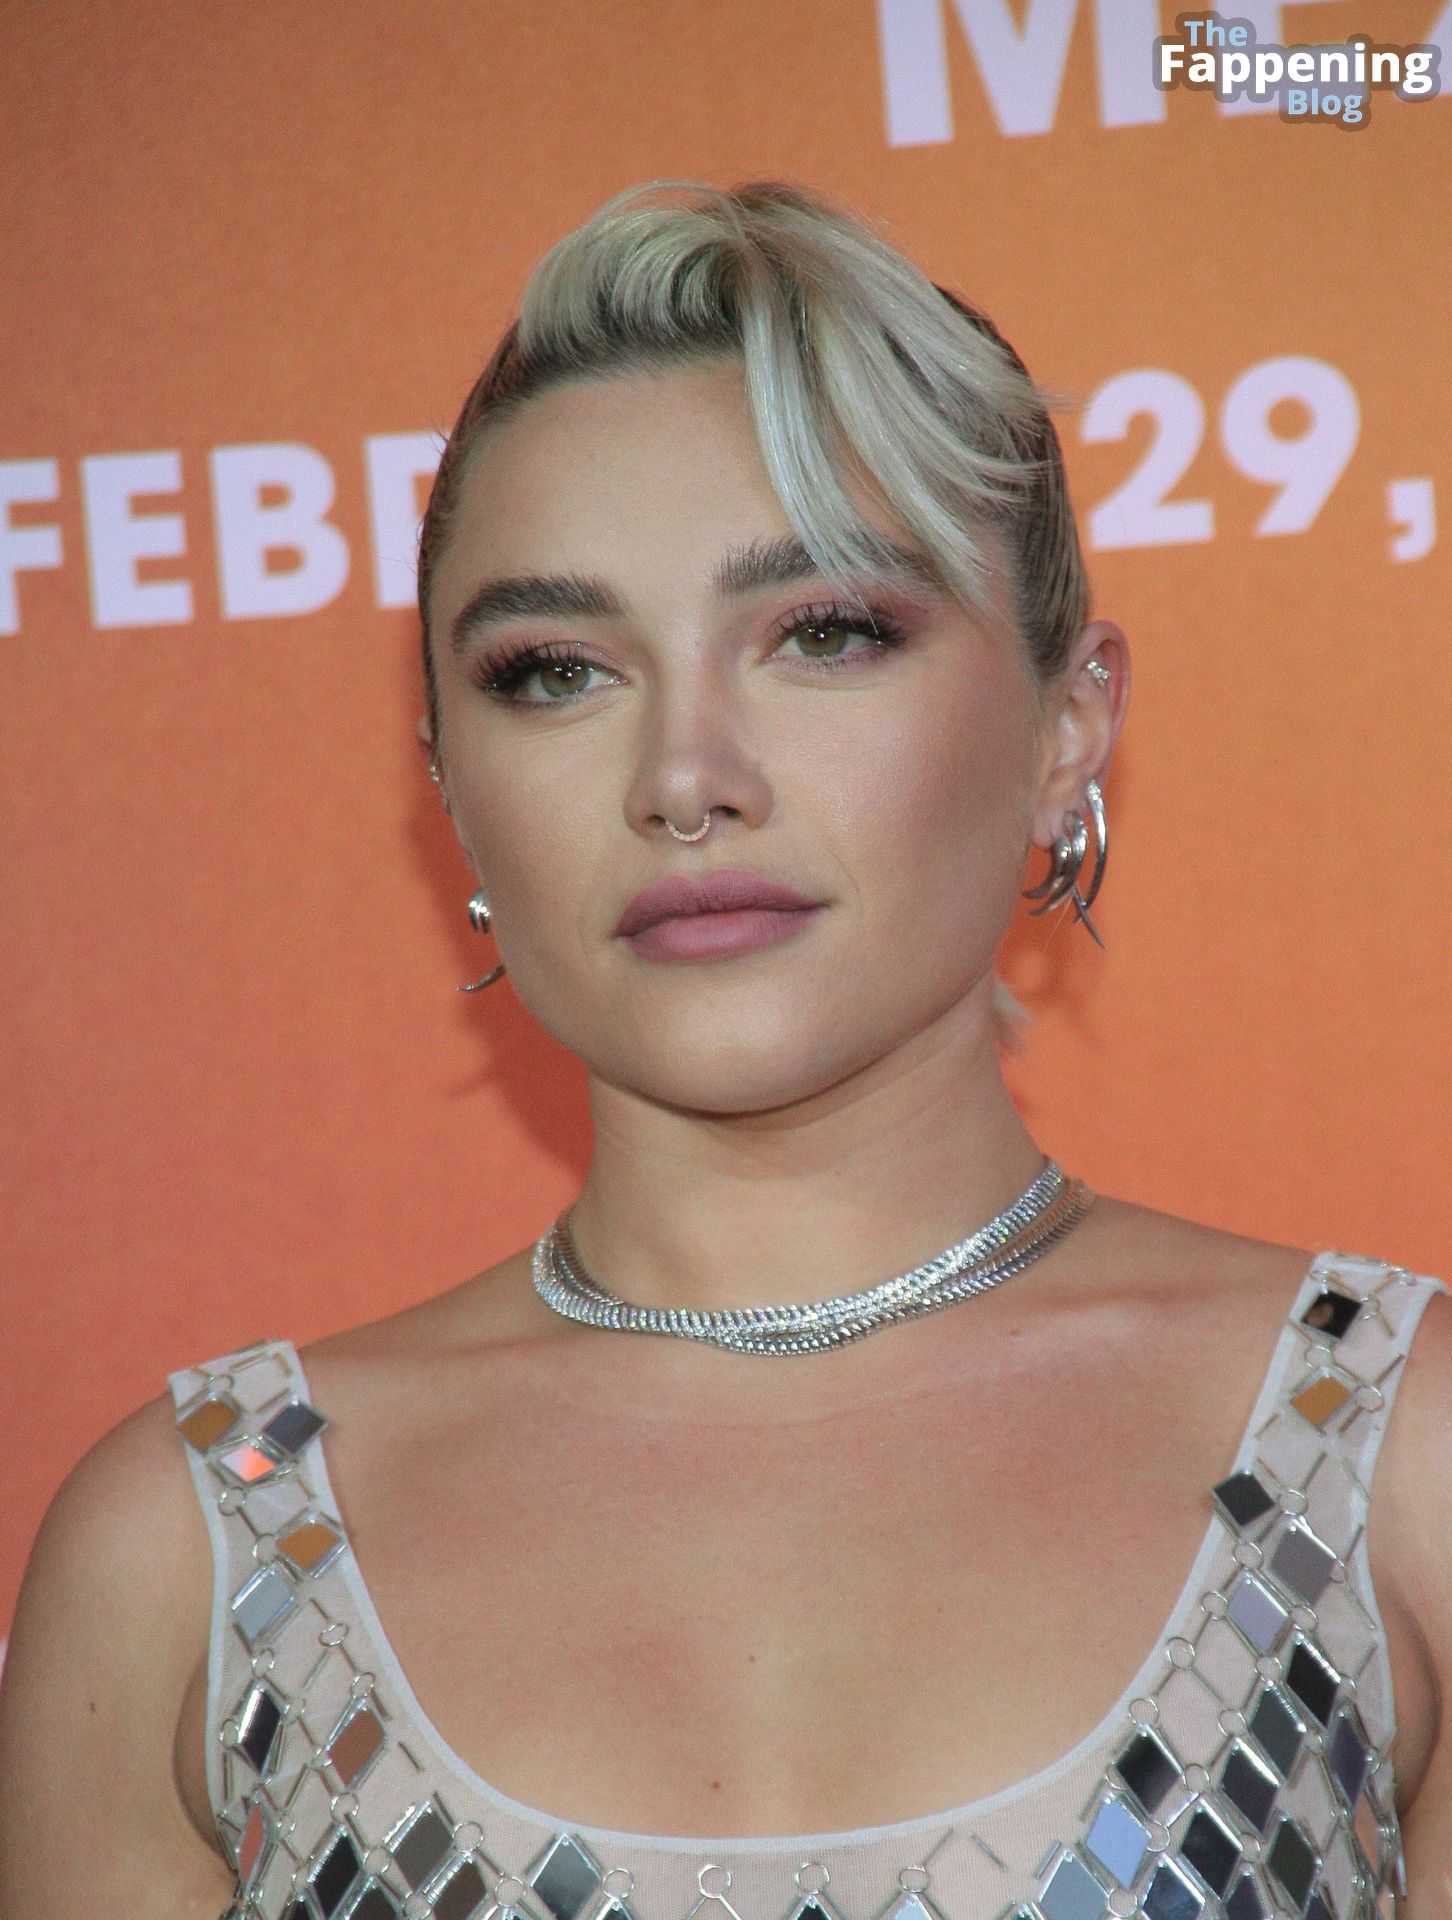 Florence-Pugh-Sexy-30-The-Fappening-Blog.jpg